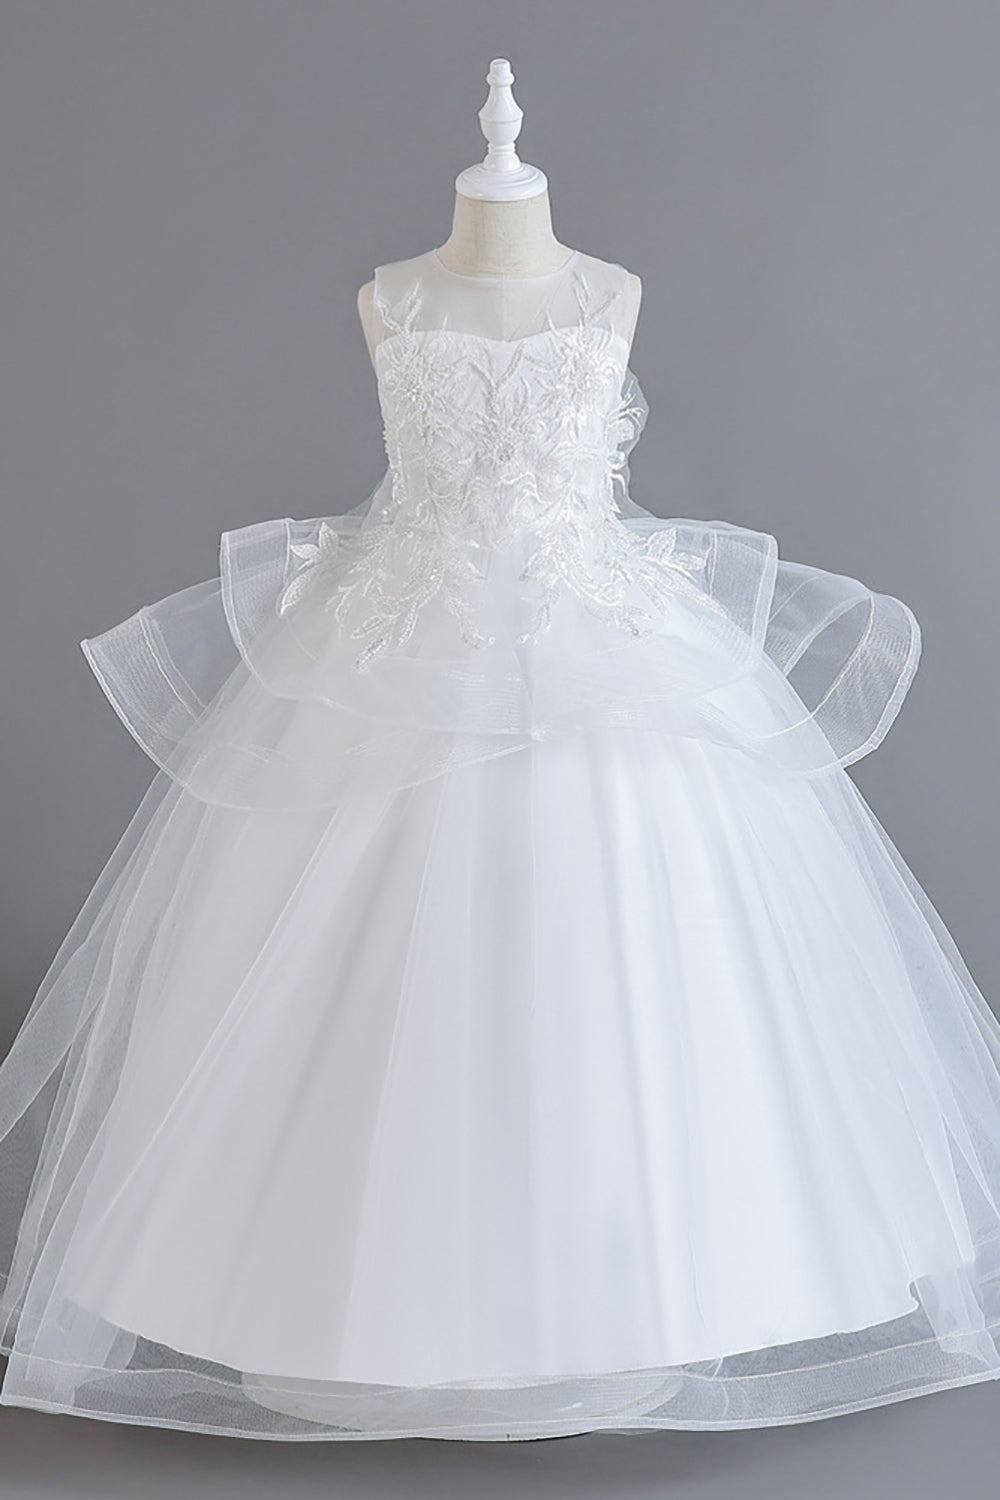 Tulle Blush Flower Girl Dress with Appliques